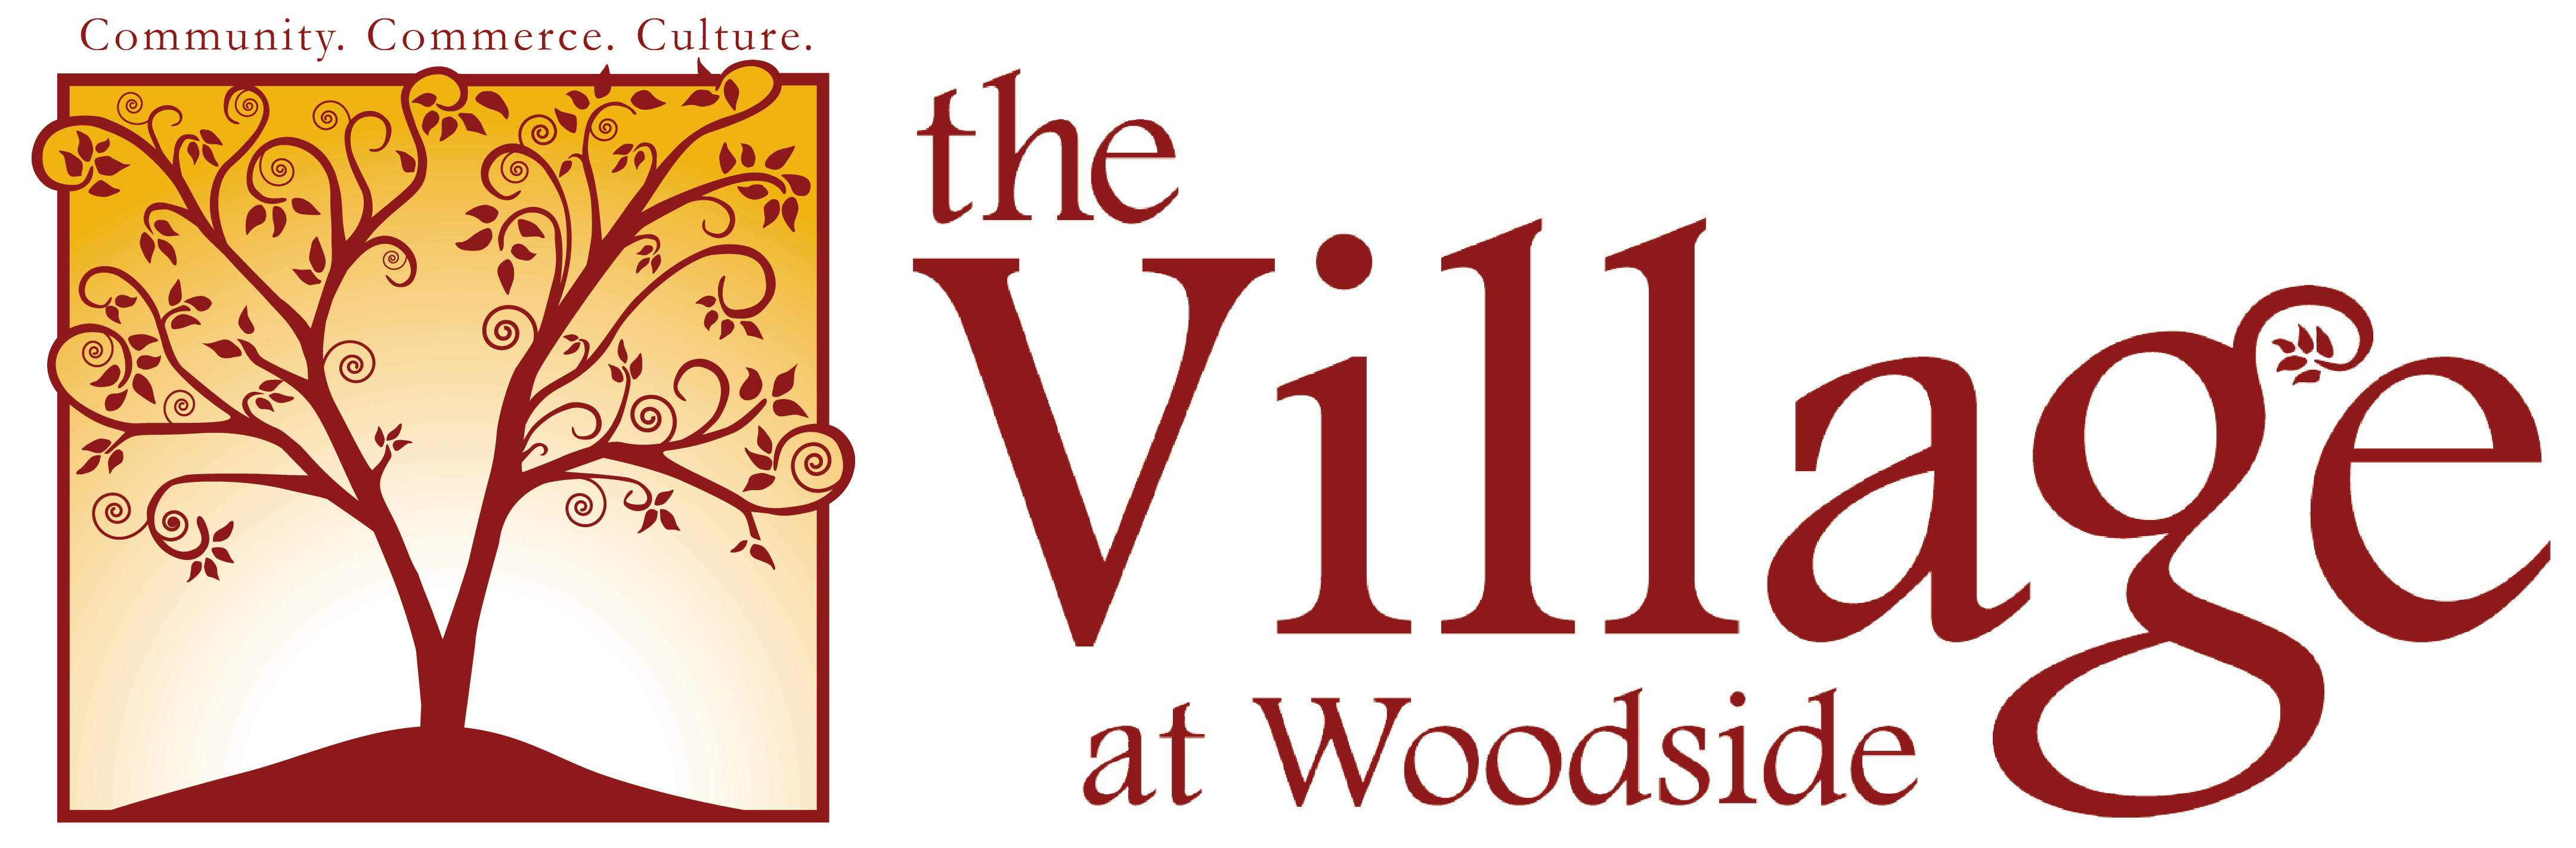 The Village at Woodside